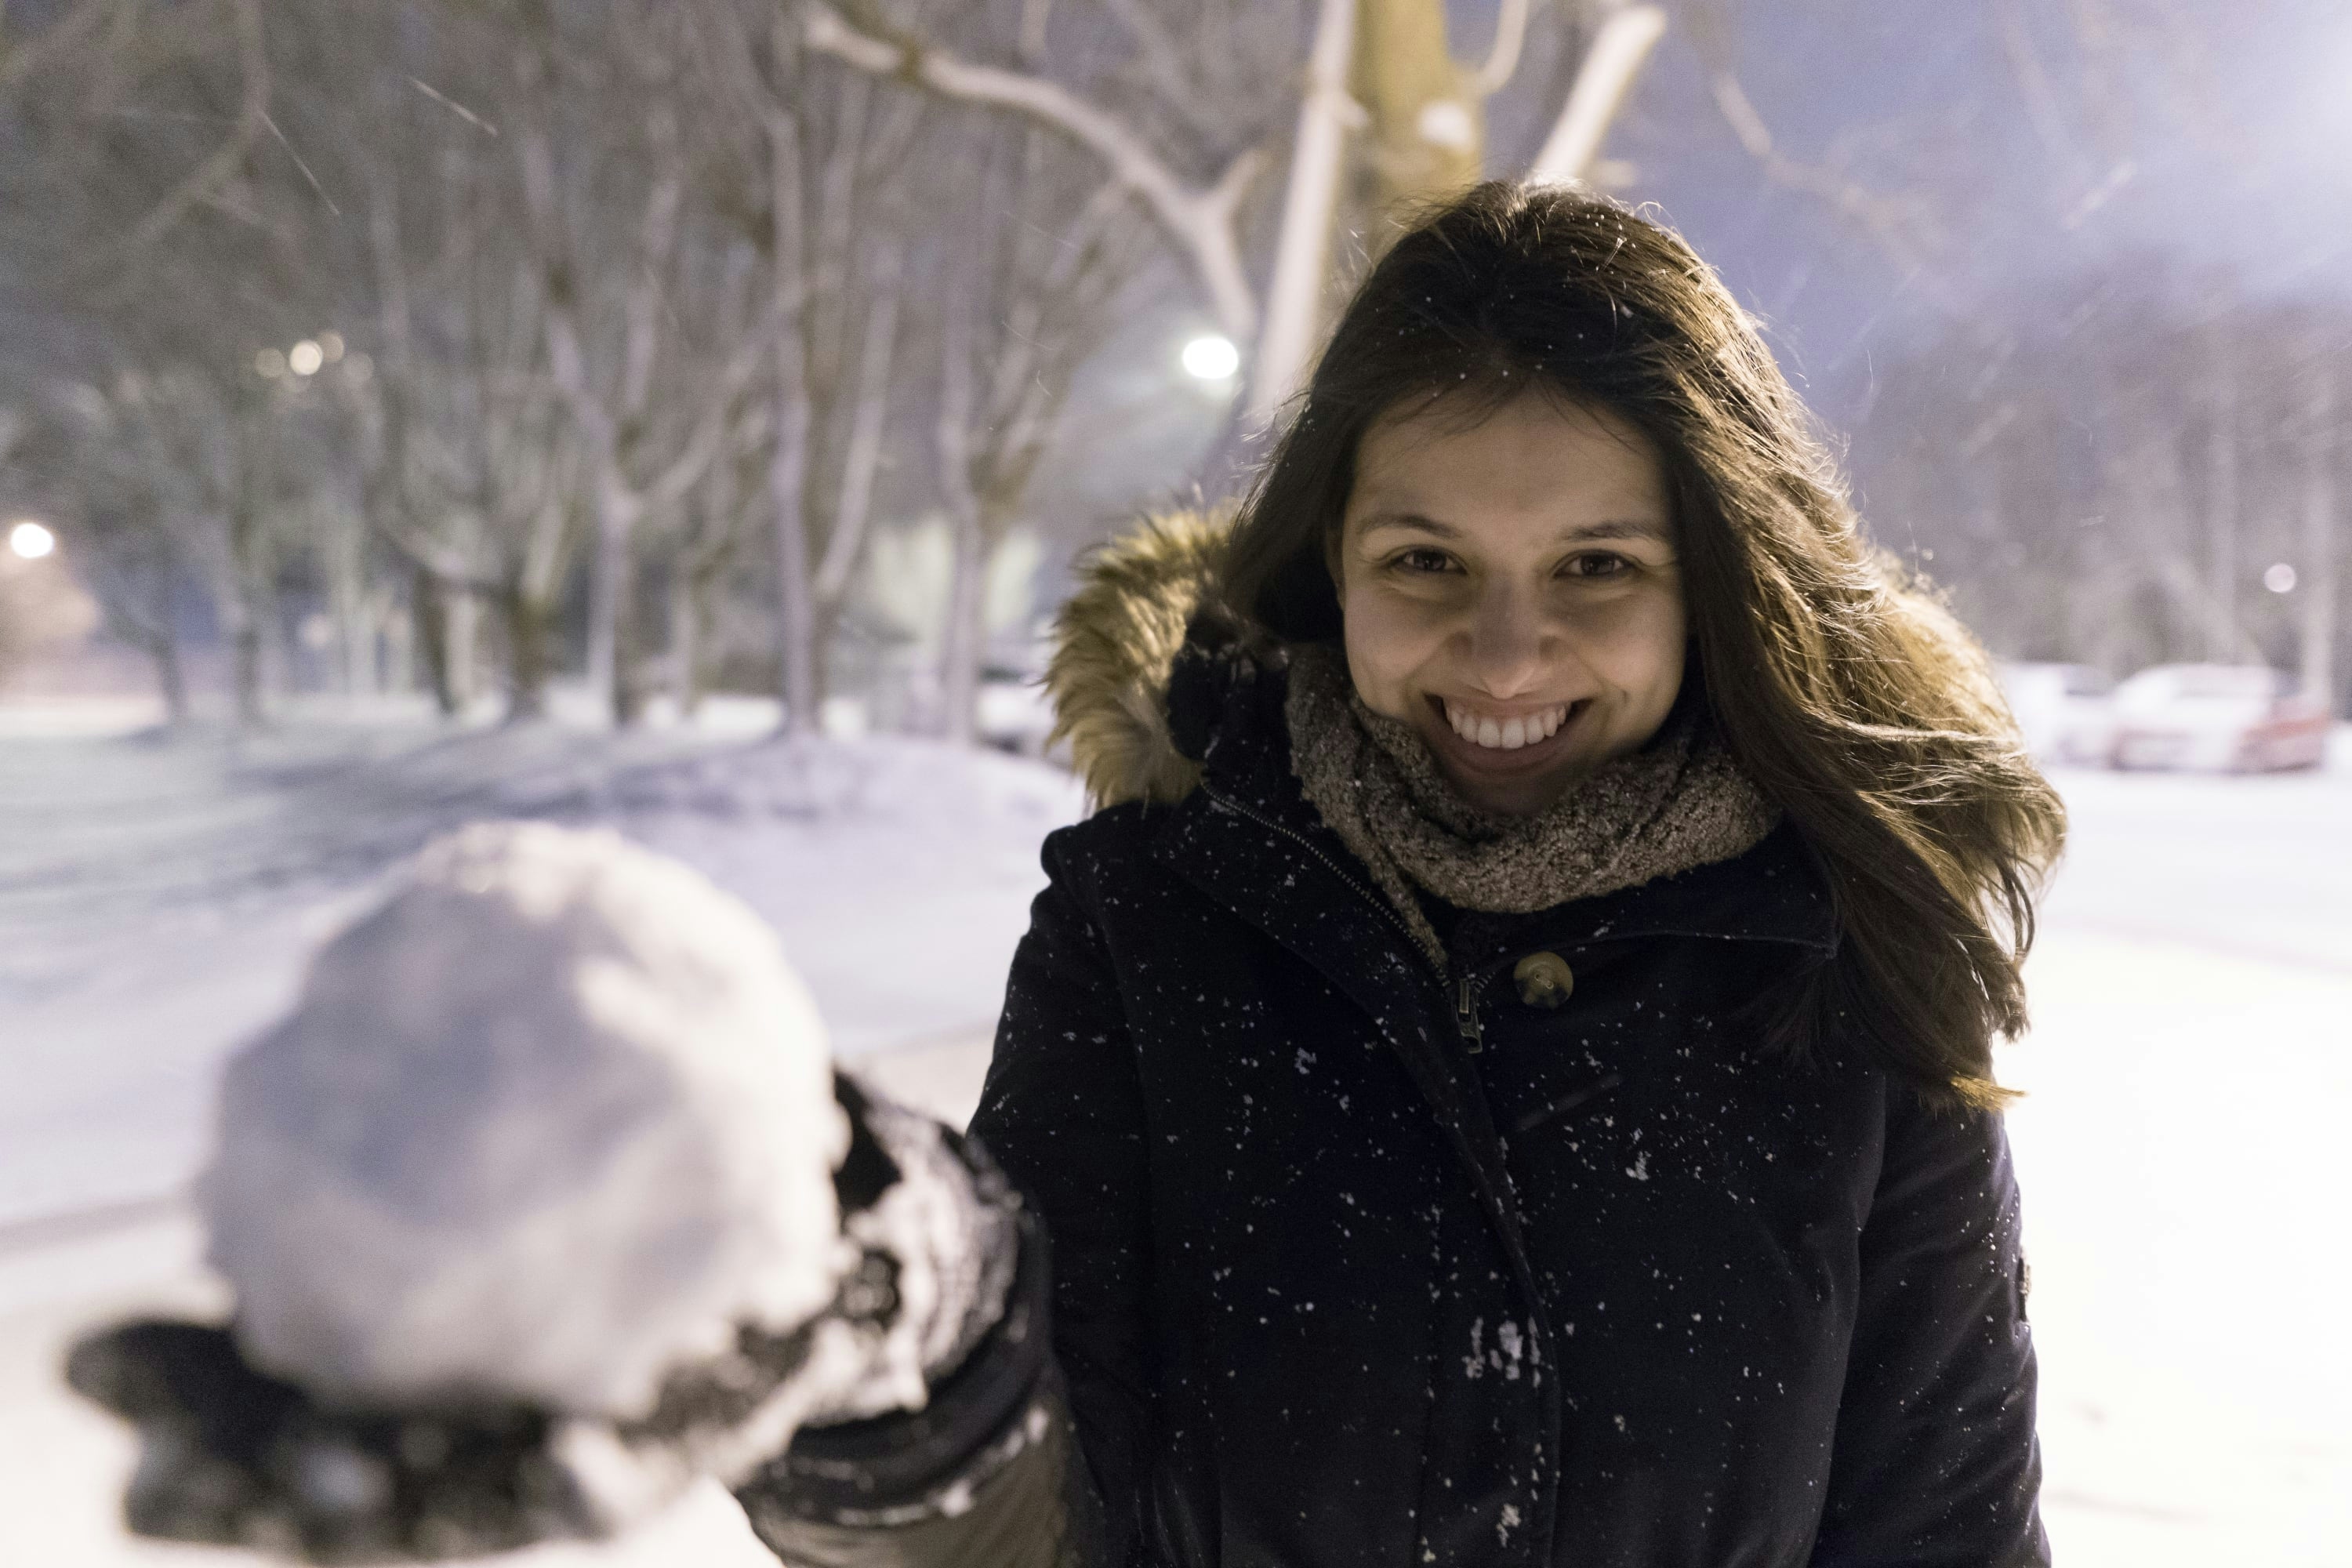 Laura holding a snowball and smiling